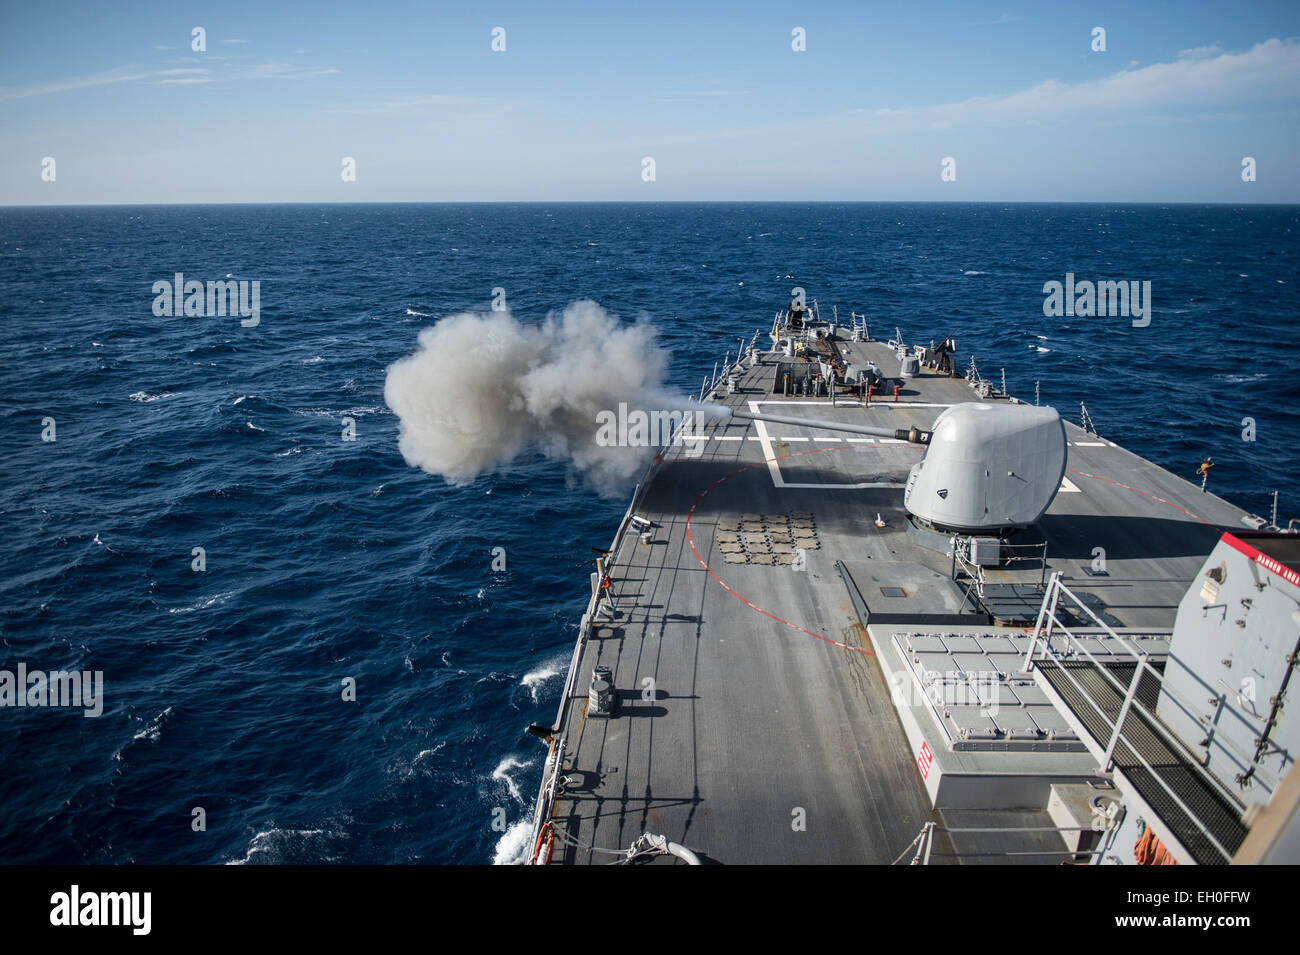 EDITERRANEAN SEA (Feb. 26, 2015) The guided-missile destroyer USS Donald Cook (DDG 75) conducts a live-fire gunnery exercise with the MK 45 5-inch gun as part of a passing exercise with the French navy frigate La Fayette (F 710). Donald Cook is forward-deployed to Rota, Spain, and is conducting naval operations in the U.S. 6th Fleet area of responsibility in support of U.S. national security interests in Europe. Stock Photo